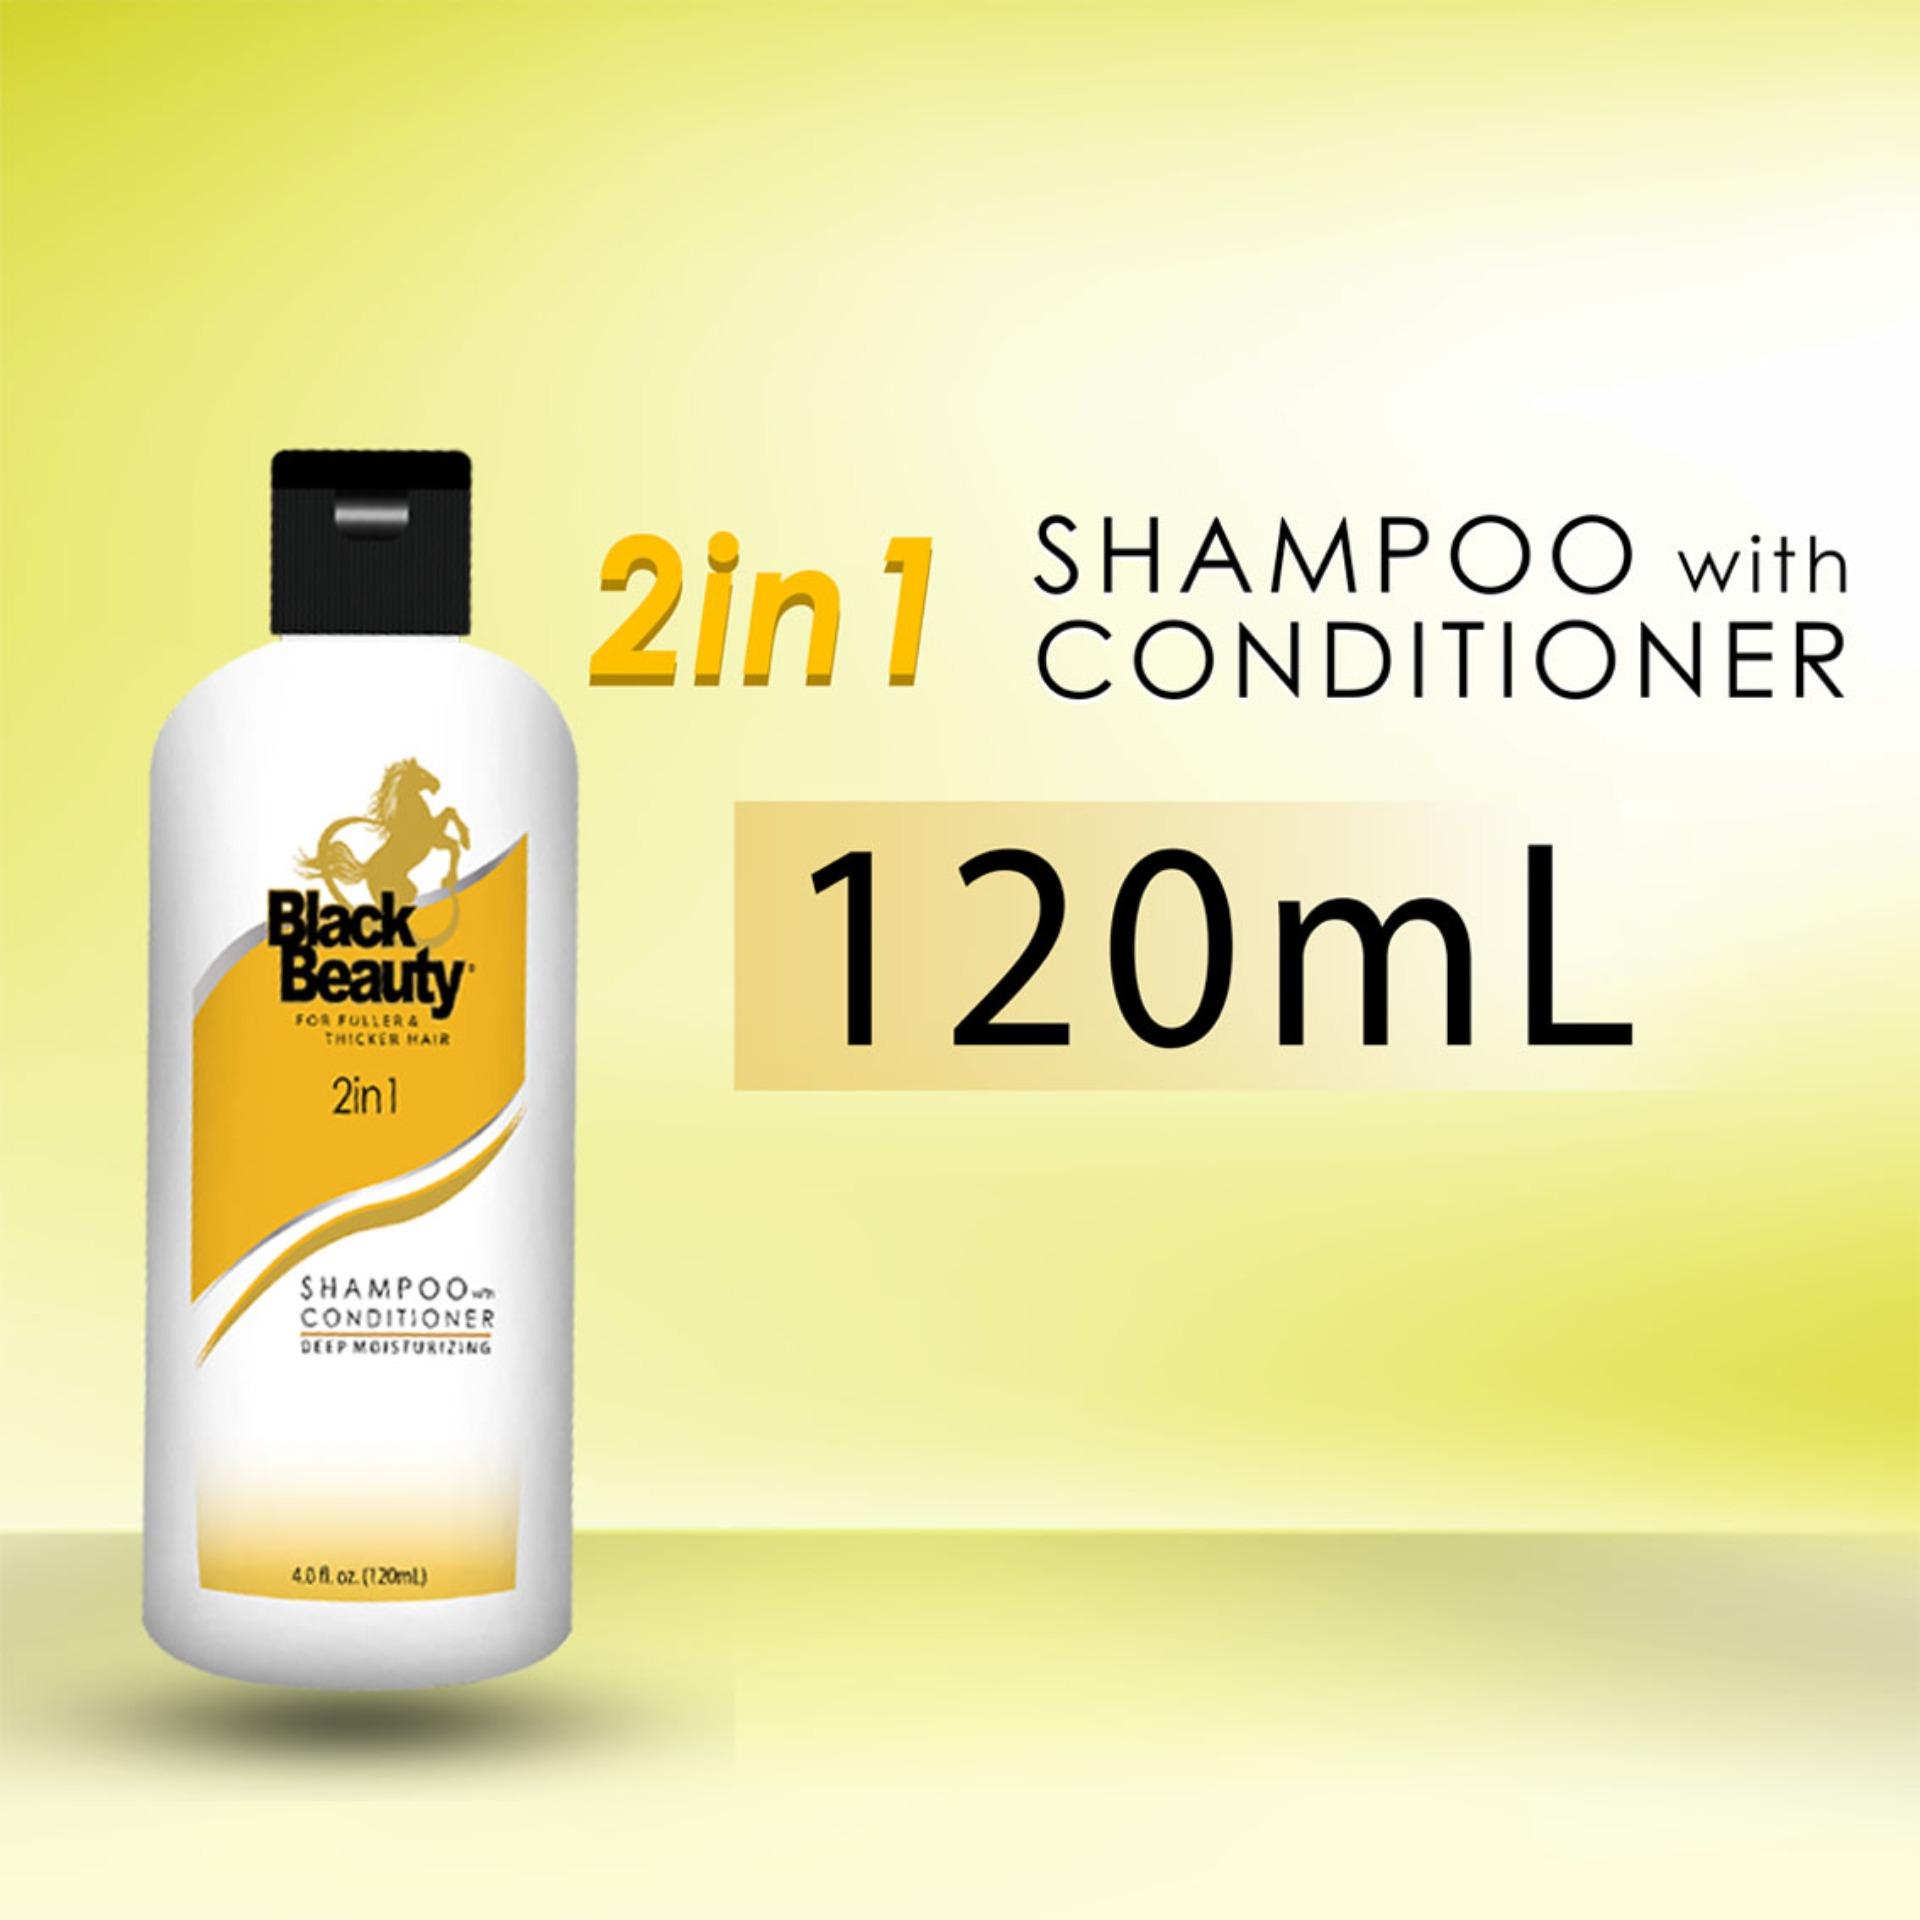 Black Beauty 2-in-1 Shampoo with Conditioner